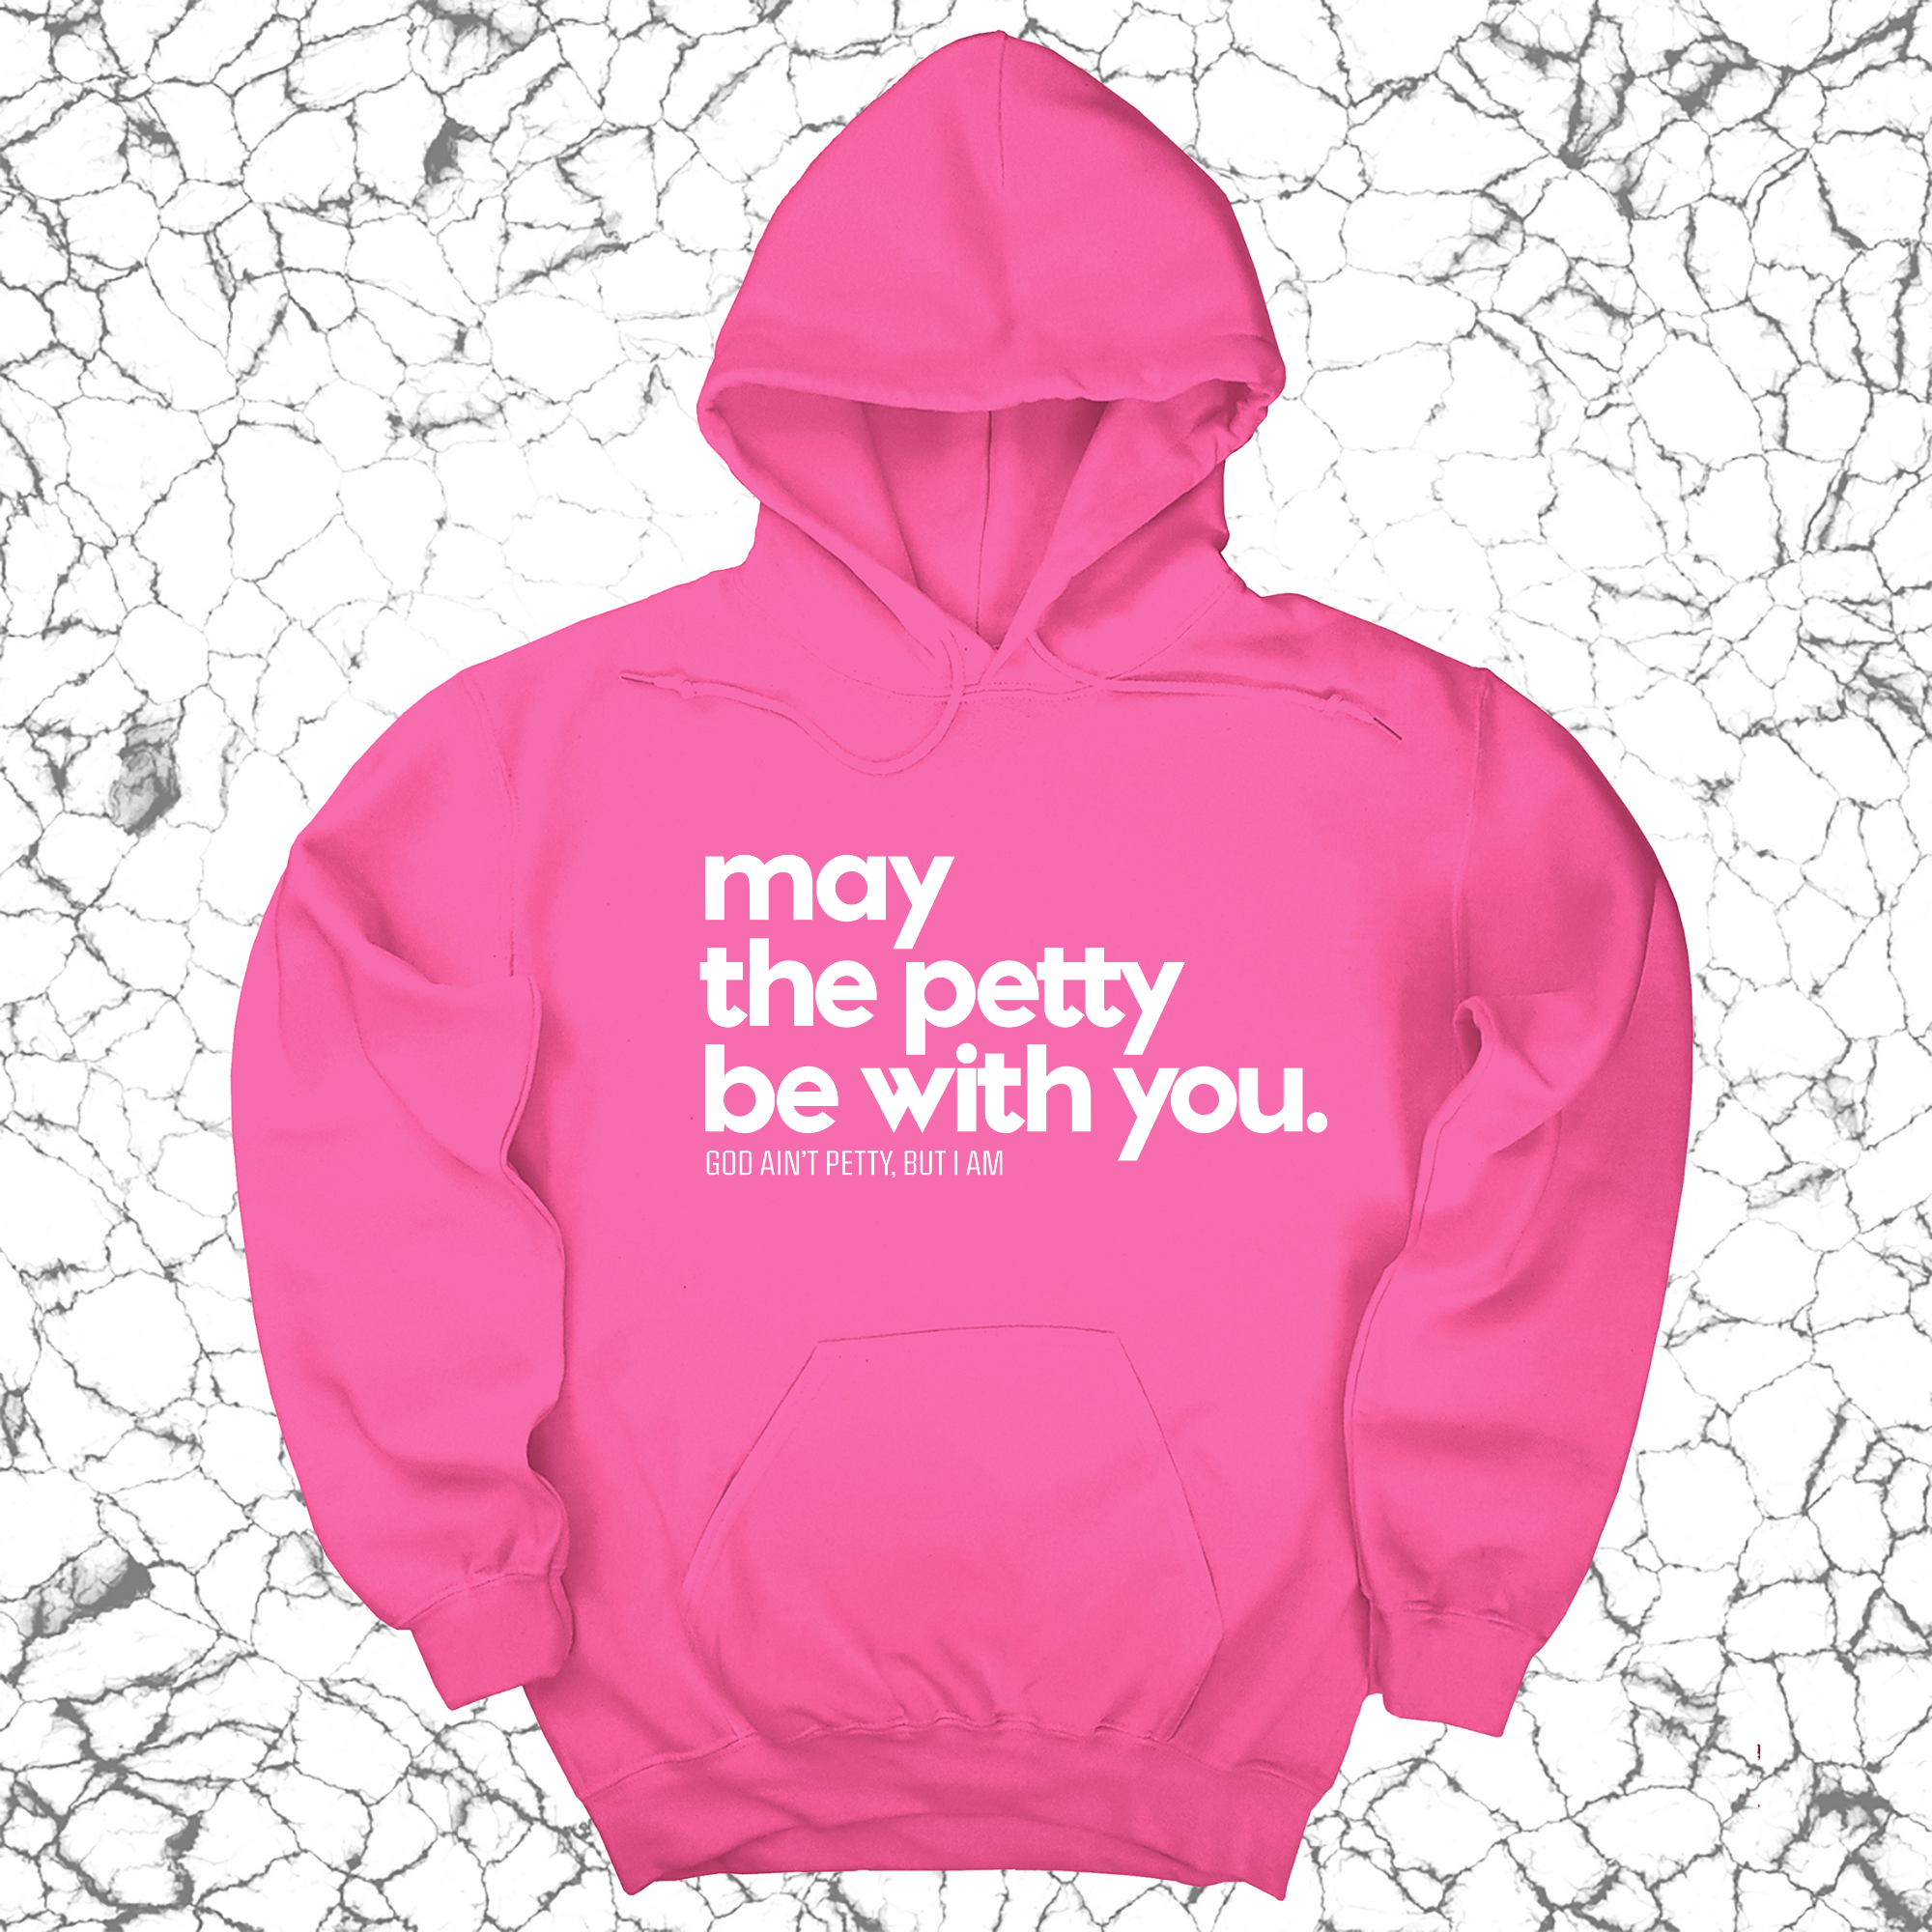 May the petty be with you Unisex Hoodie-Hoodie-The Original God Ain't Petty But I Am